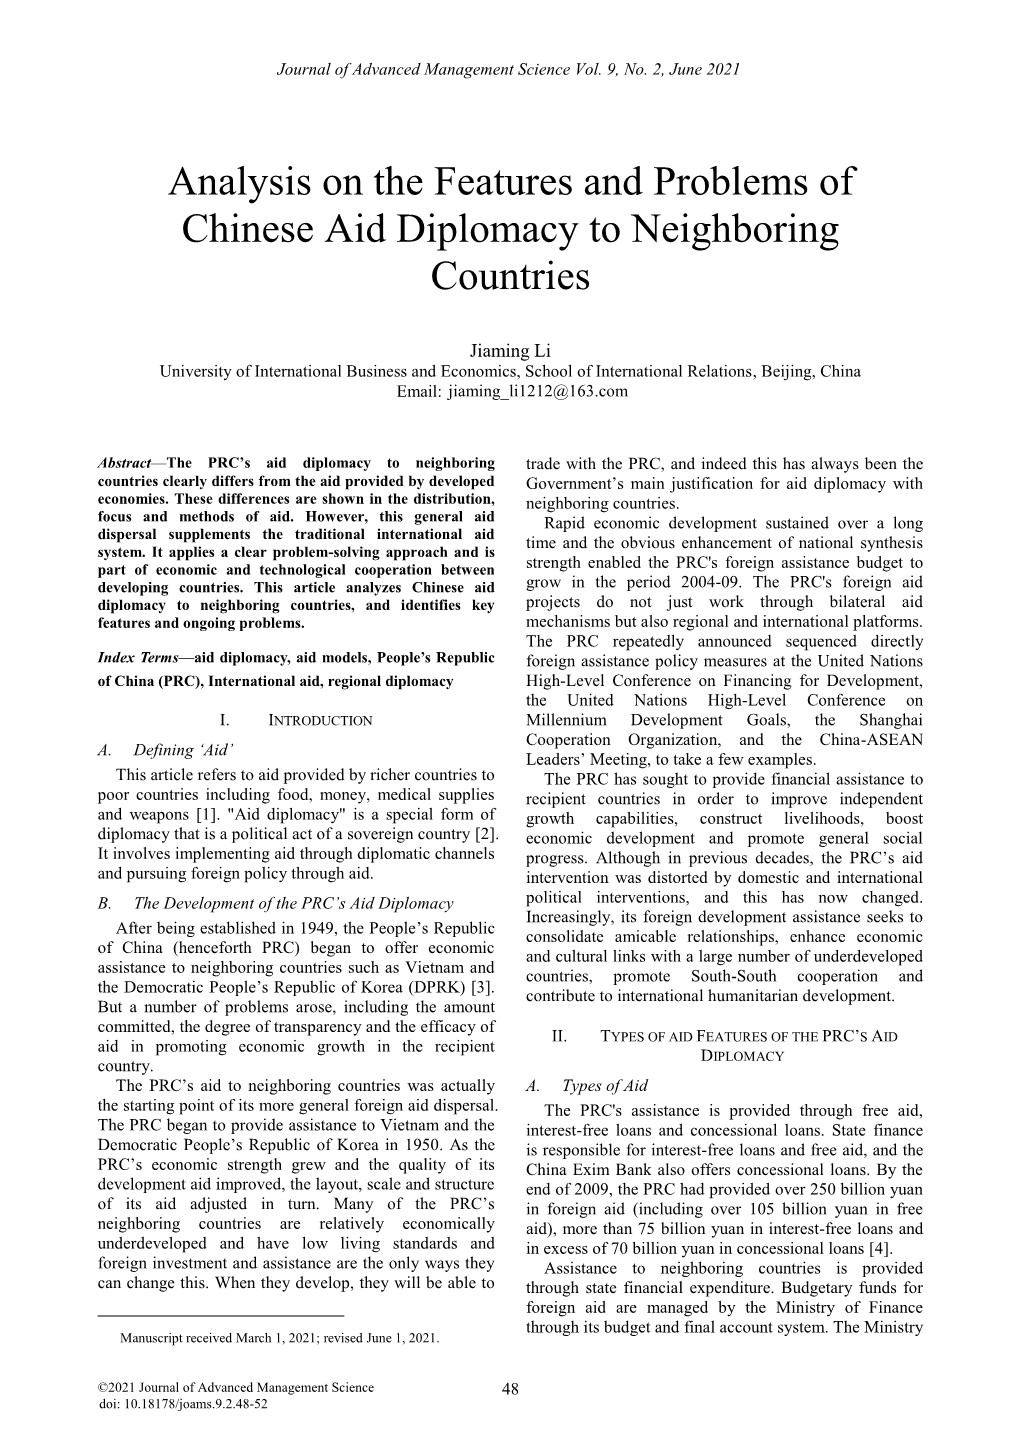 Analysis on the Features and Problems of Chinese Aid Diplomacy to Neighboring Countries